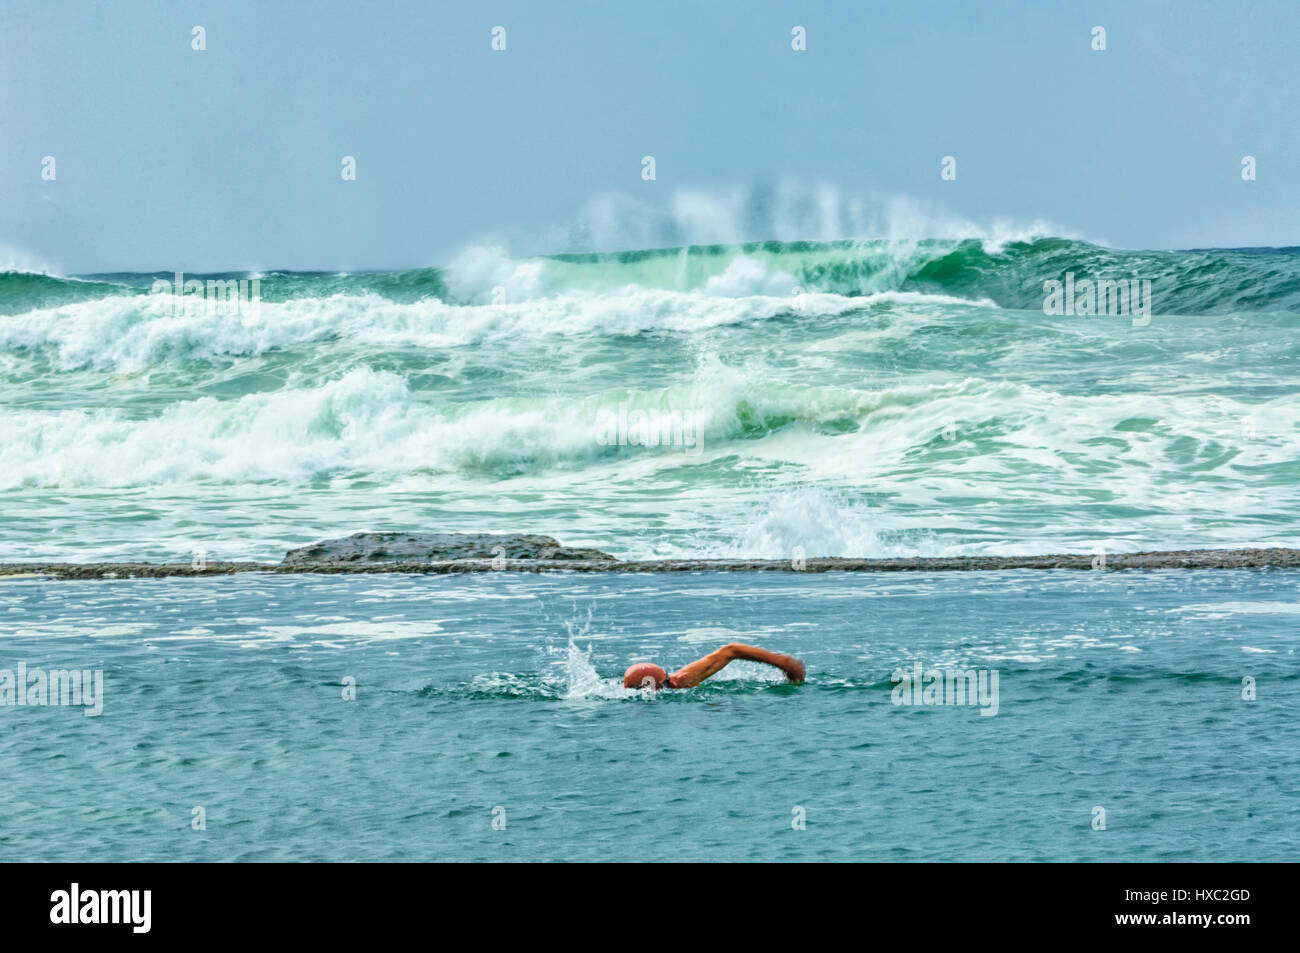 Man swimming in a rock pool in front of rough seas with large breaking waves, Gerringong, Illawarra Coast, New South Wales, NSW, Australia Stock Photo